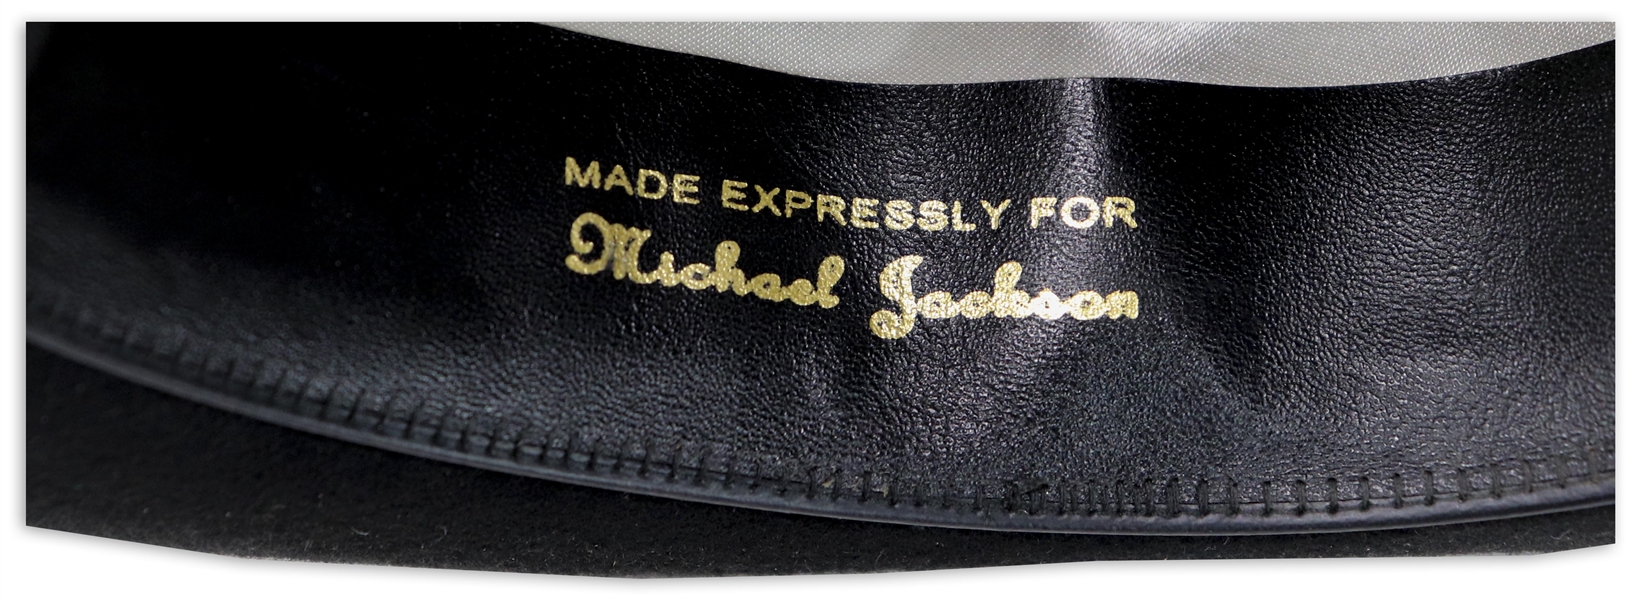 Michael Jackson's Famous Stage-Worn Black Fedora -- From 1984 ''Victory'' Tour Used When Jackson Performed ''Billie Jean''